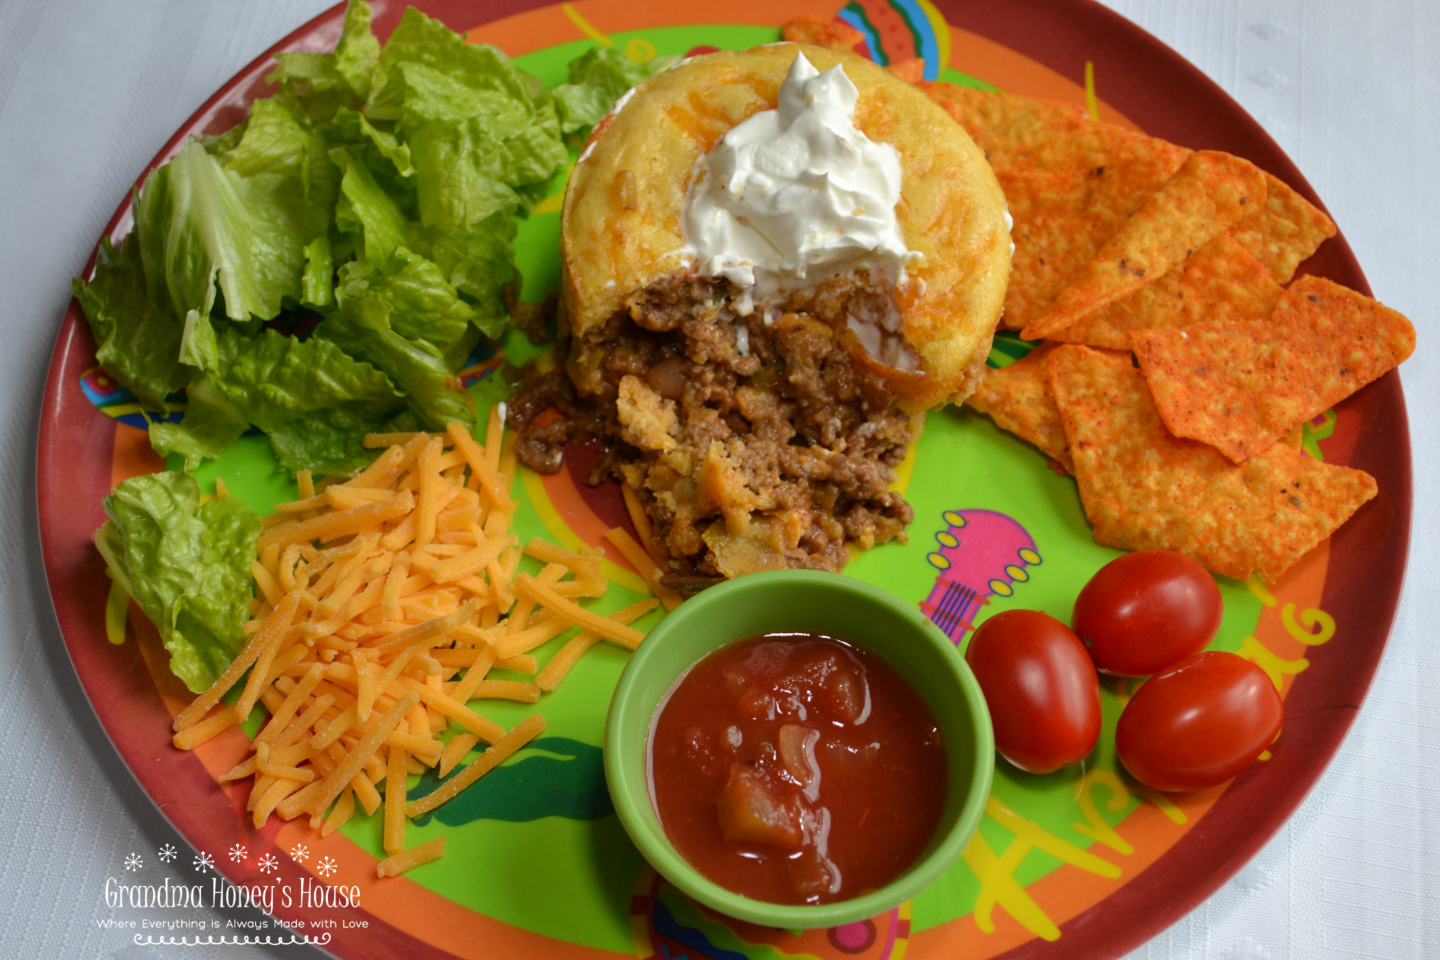 Cornbread Topped Taco Pot Pie is a ramekin filled with a taco meat filling, salsa, cheese, and then covered with a cornbread topping.